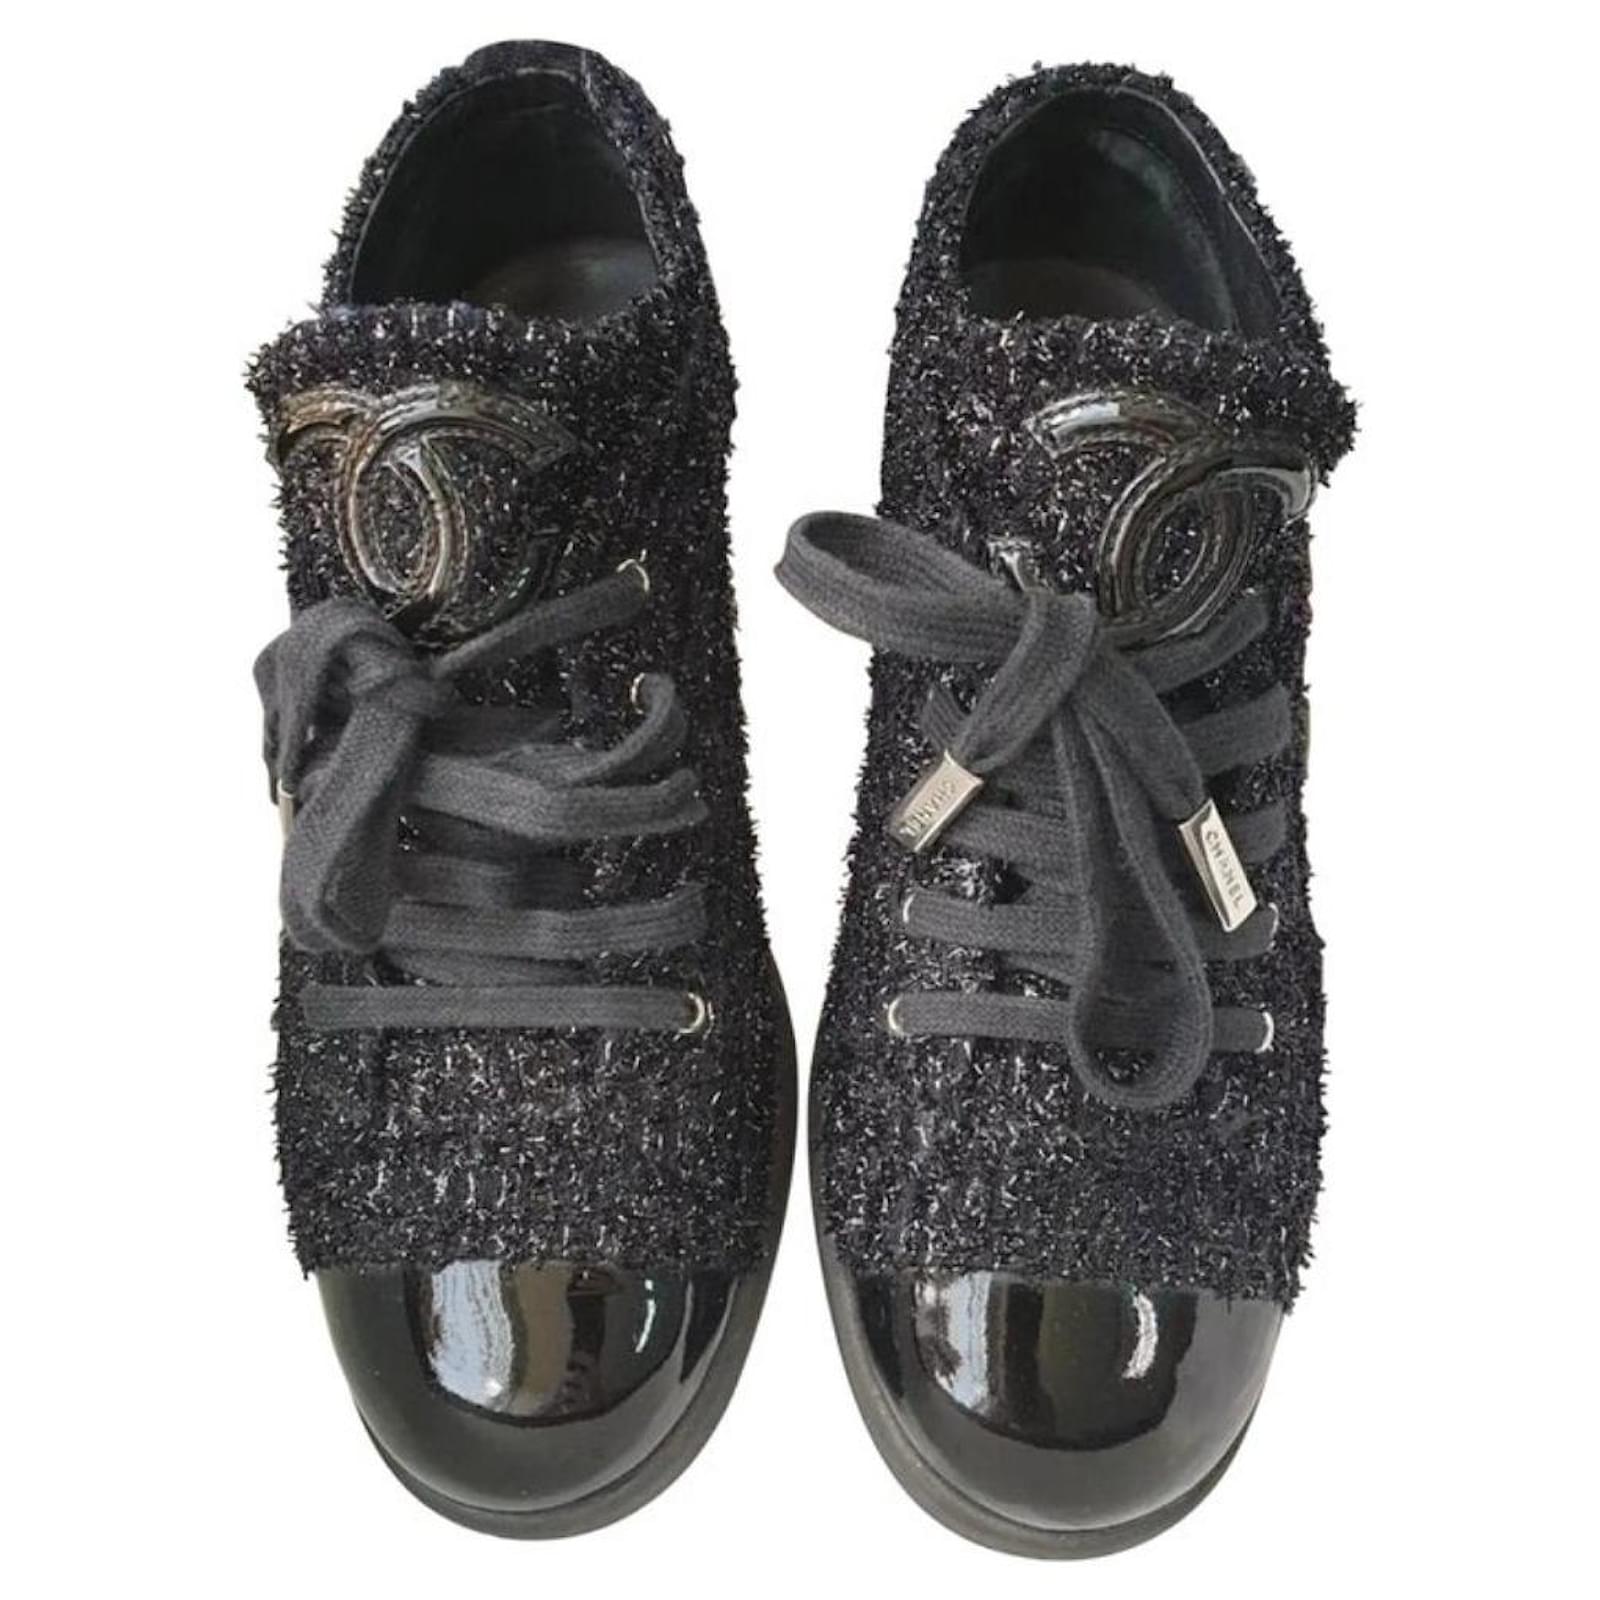 Flats Chanel Chanel Black Navy Blue Shimmery Tweed Patent Leather Cap Toe Sneakers